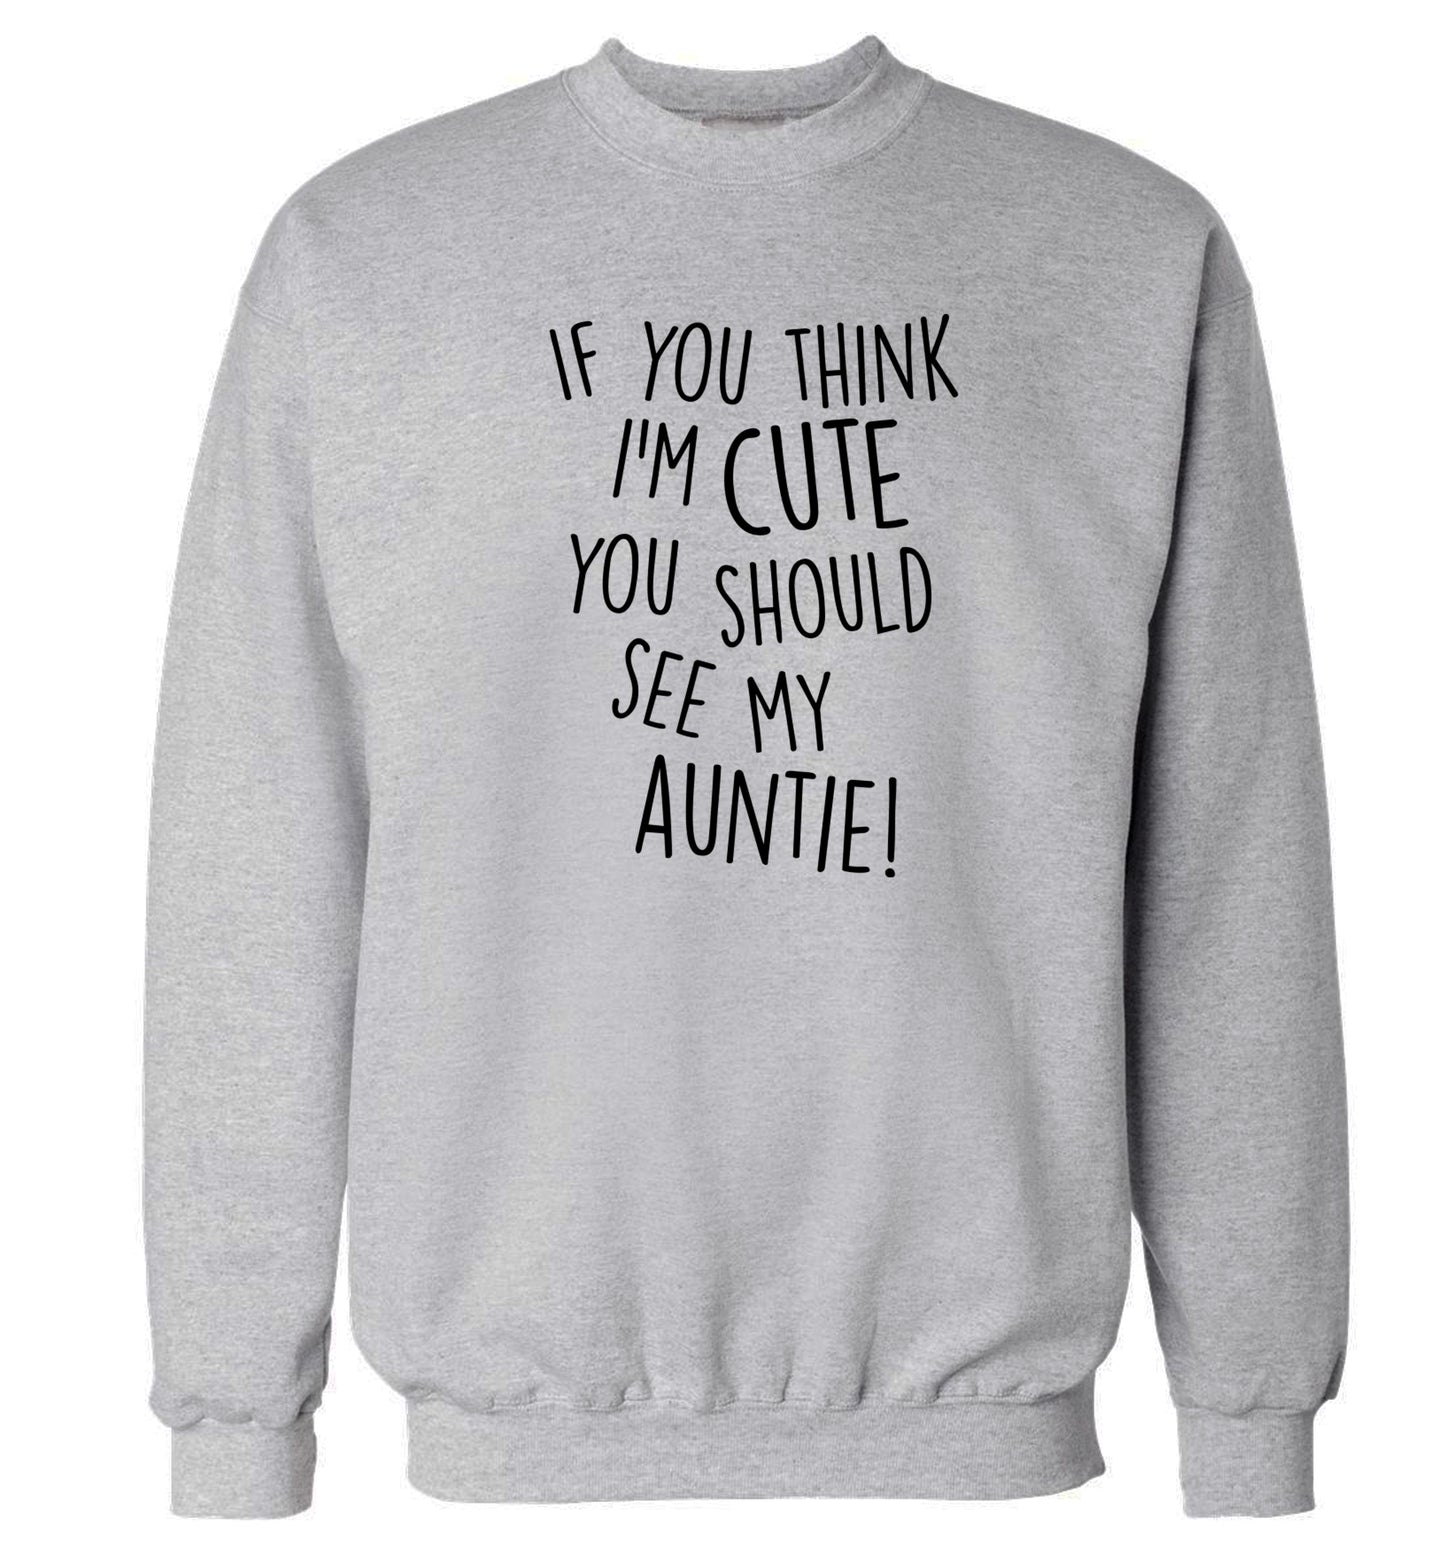 If you think I'm cute you should see my auntie Adult's unisex grey Sweater 2XL